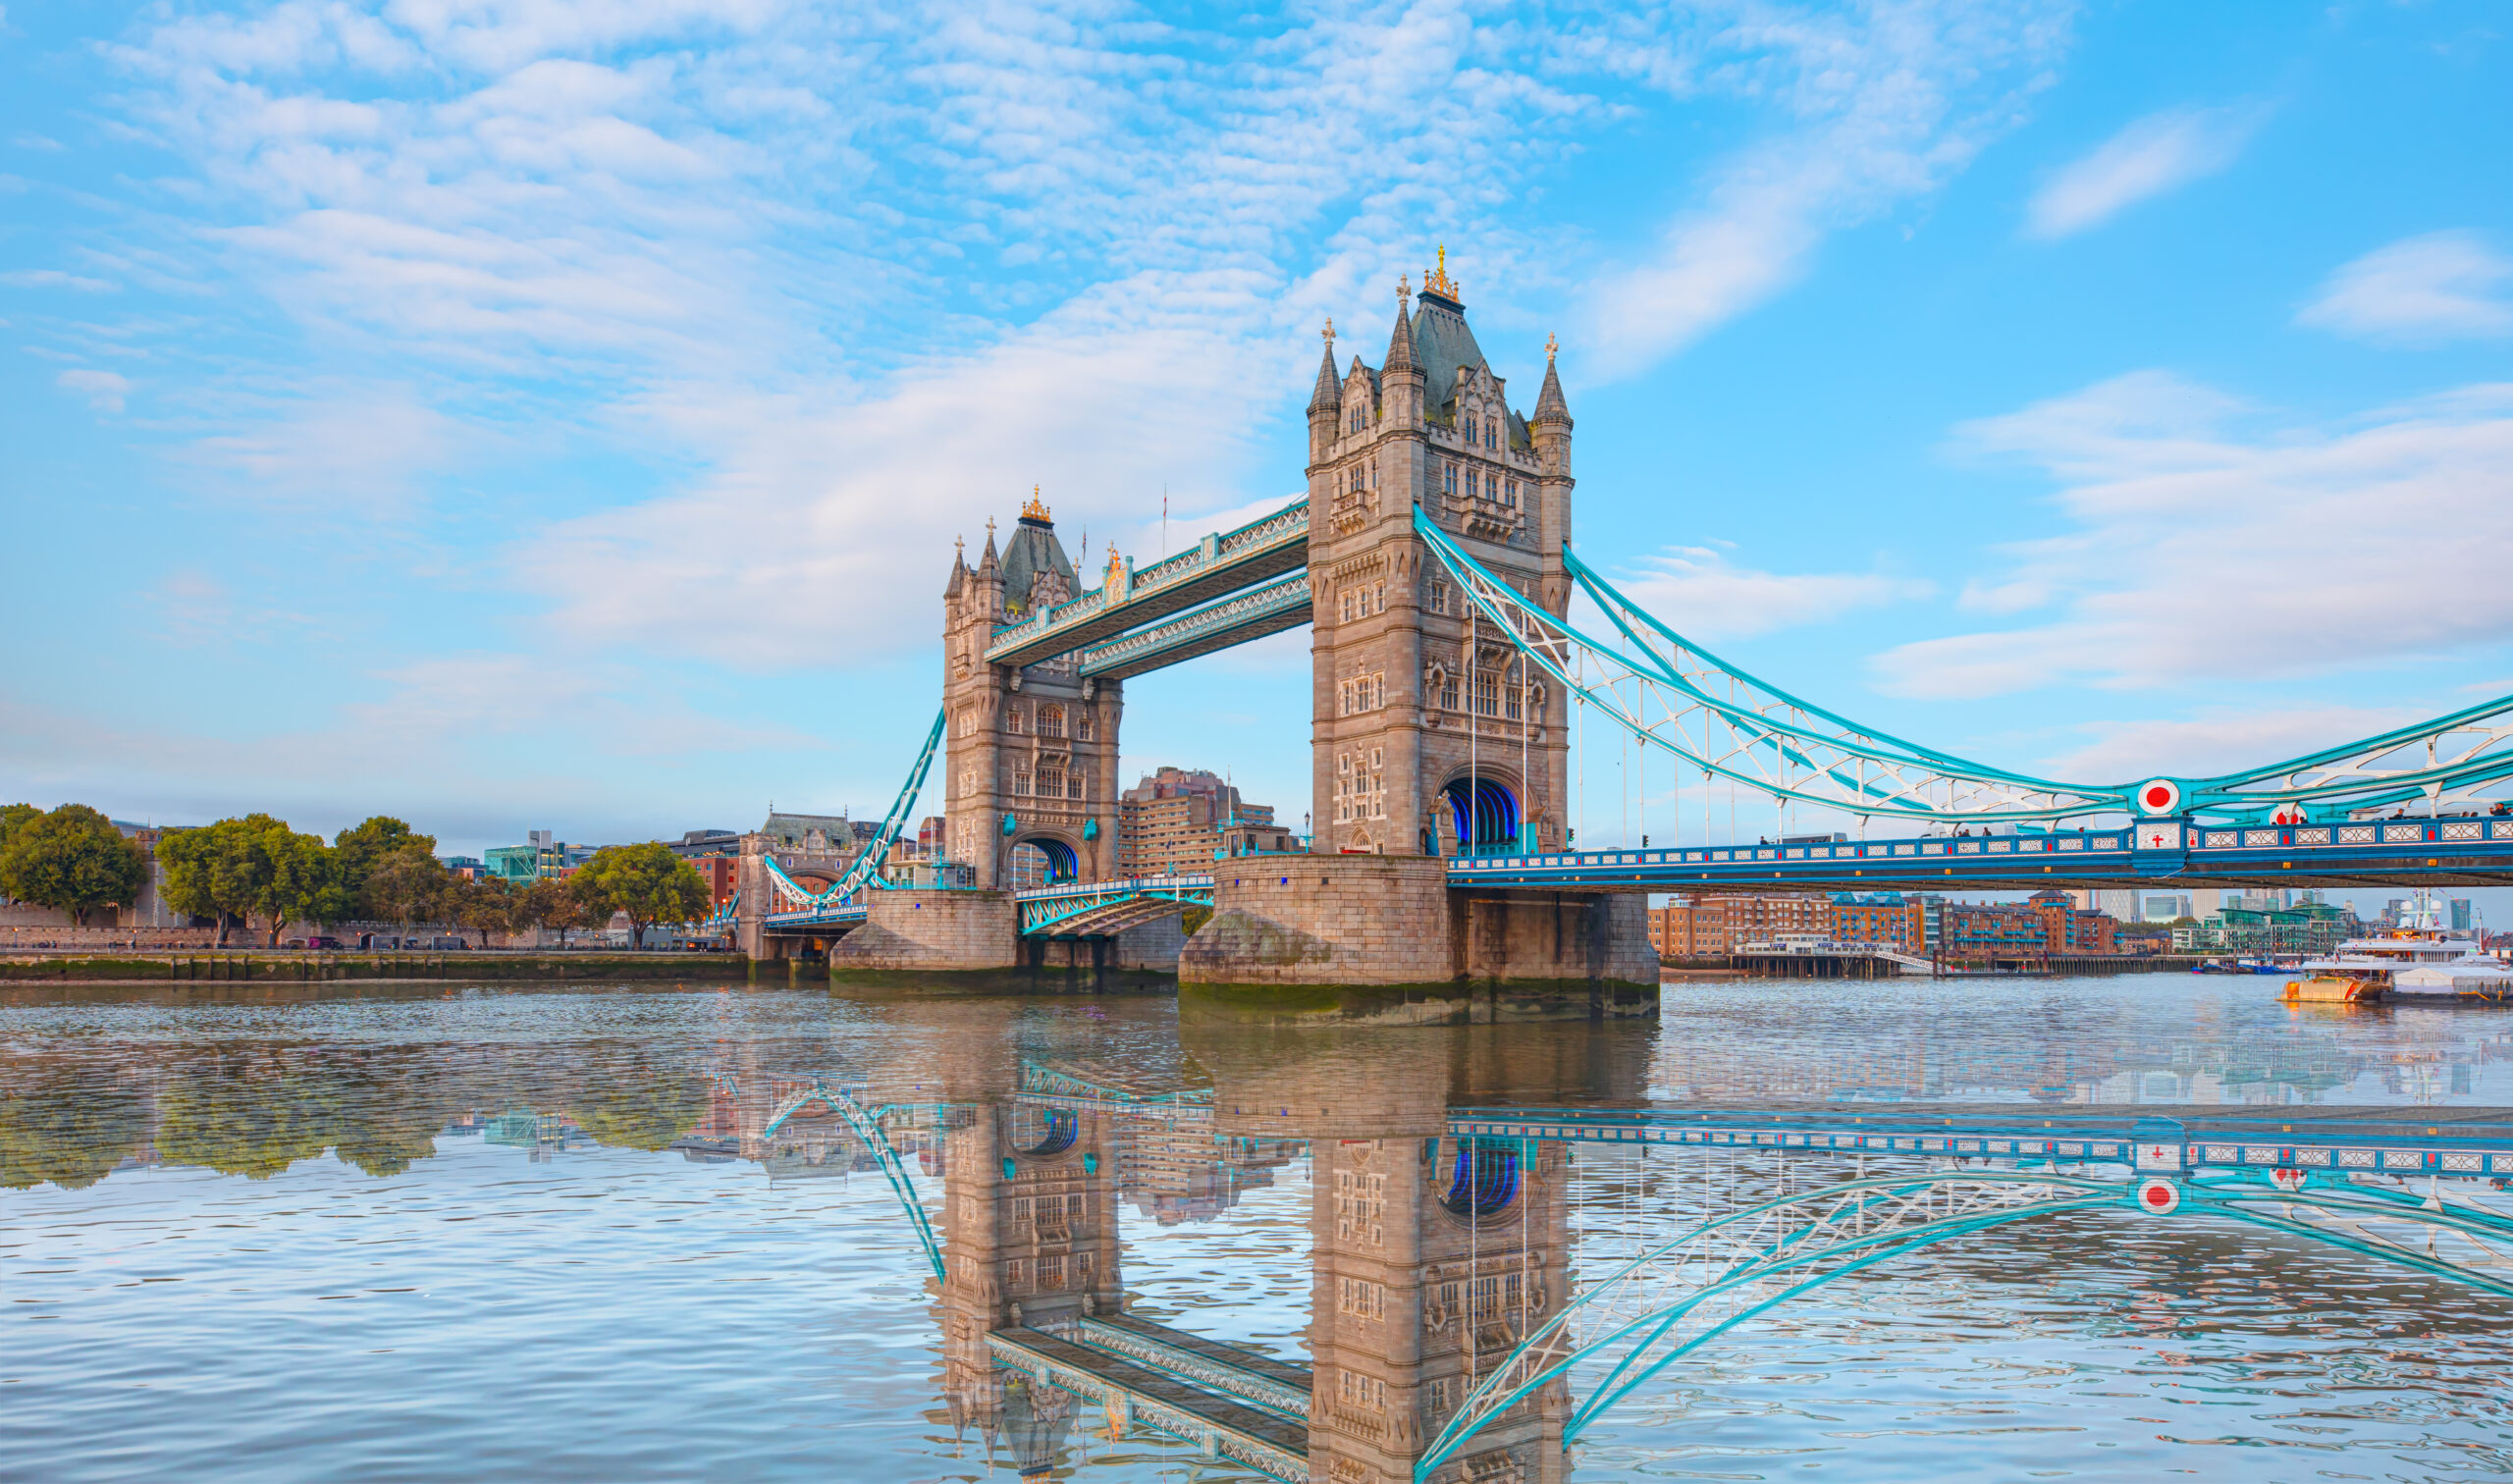 Panorama of the Tower Bridge, Tower of London on Thames river -